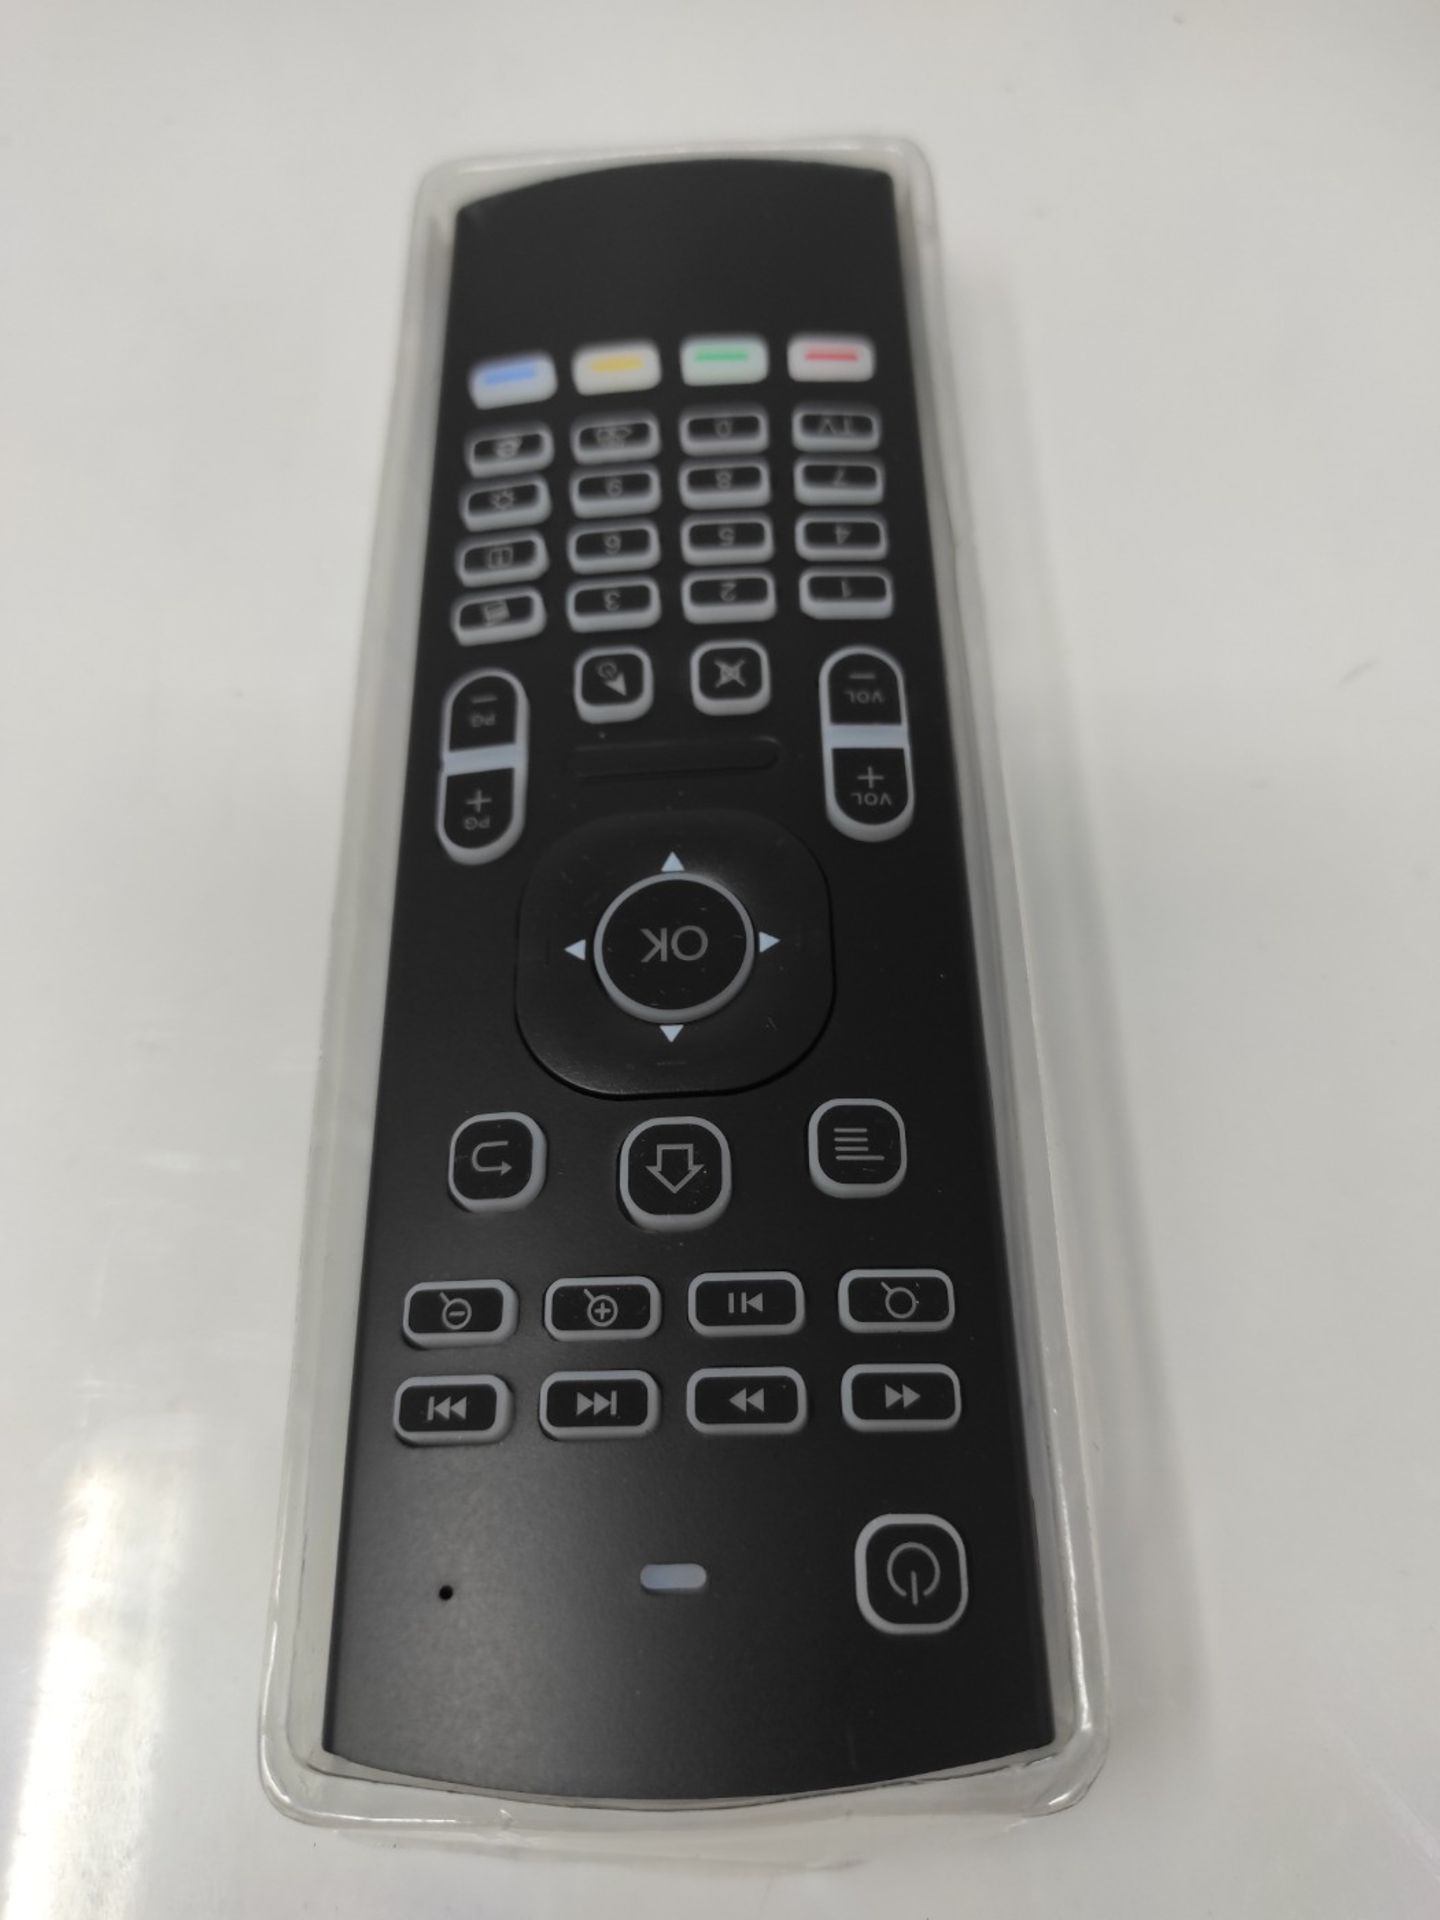 Prochosen 2.4G Backlit Air Mouse Remote Control, Wireless Keyboard, and Infrared Learn - Image 2 of 2